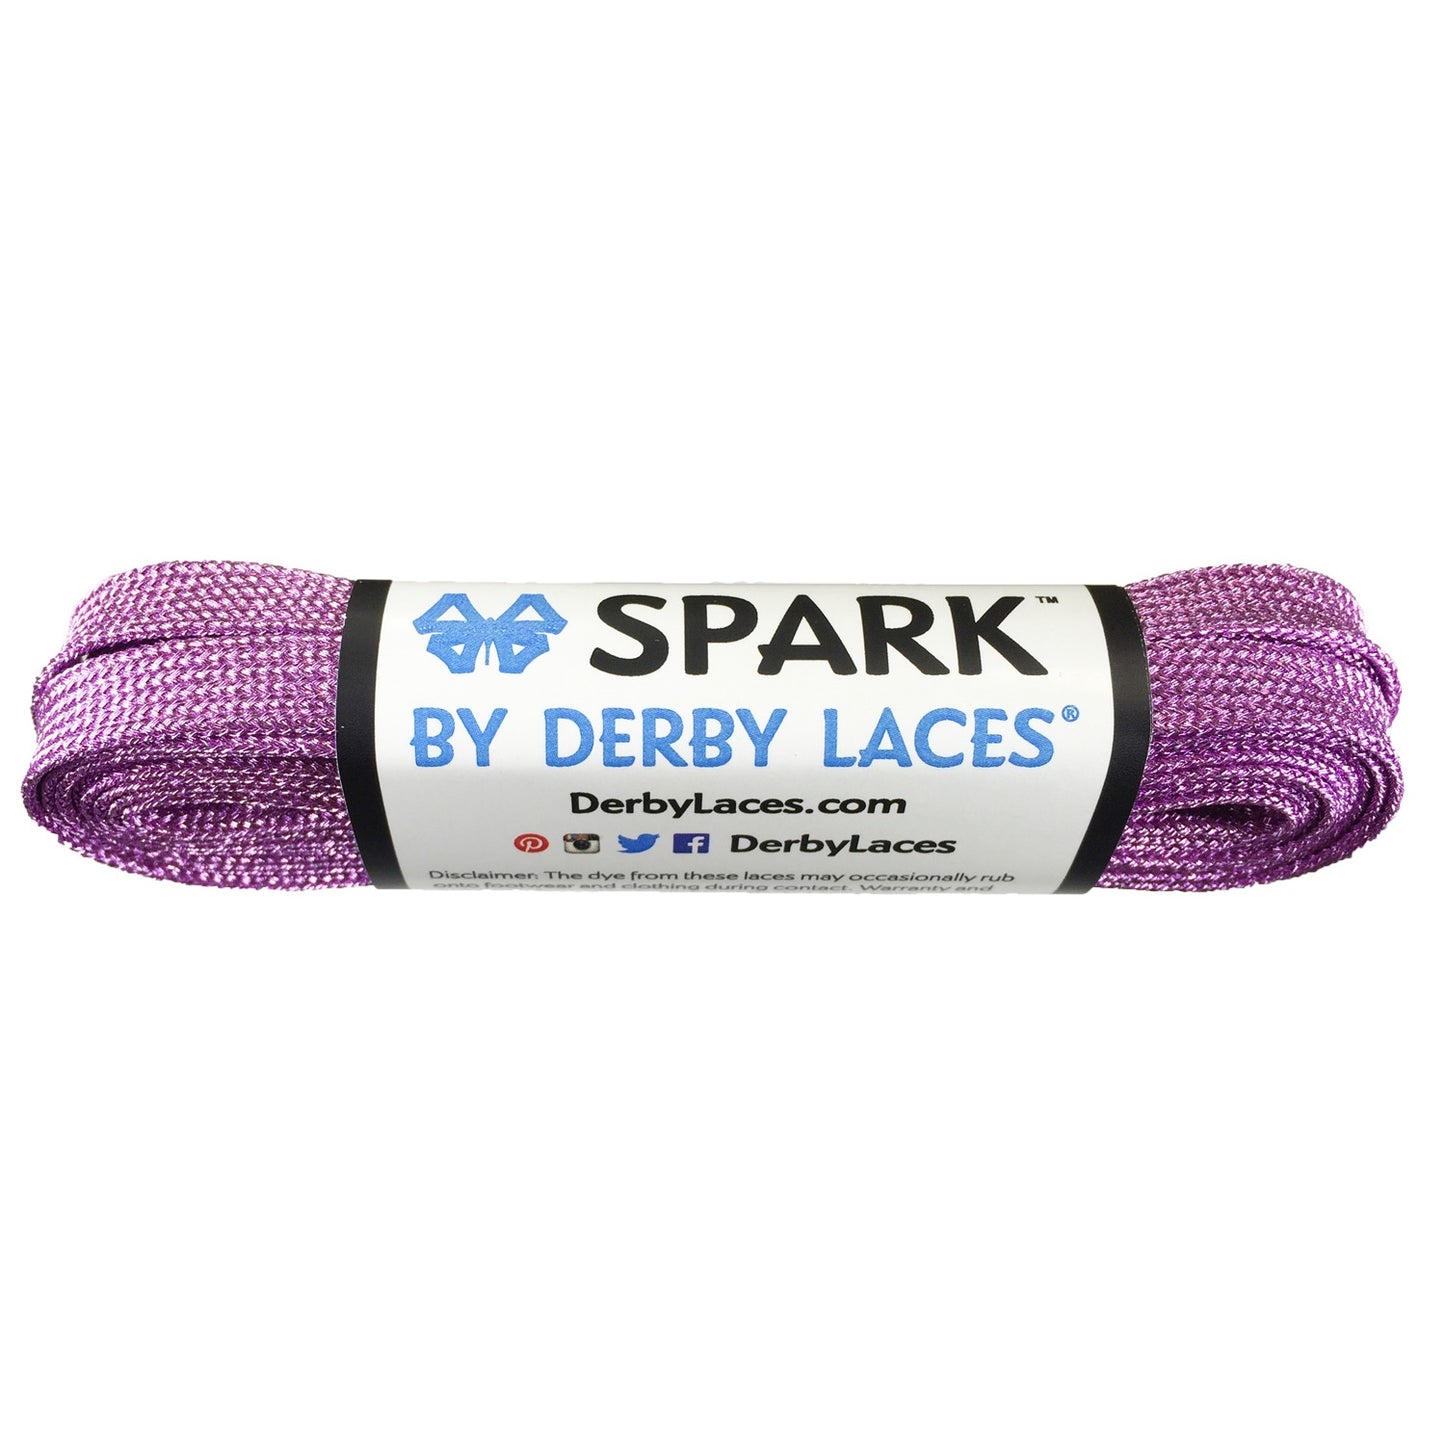 Lilac Purple 96 inch (244 cm) SPARK by Derby Laces Metallic Roller Derby Skate Lace